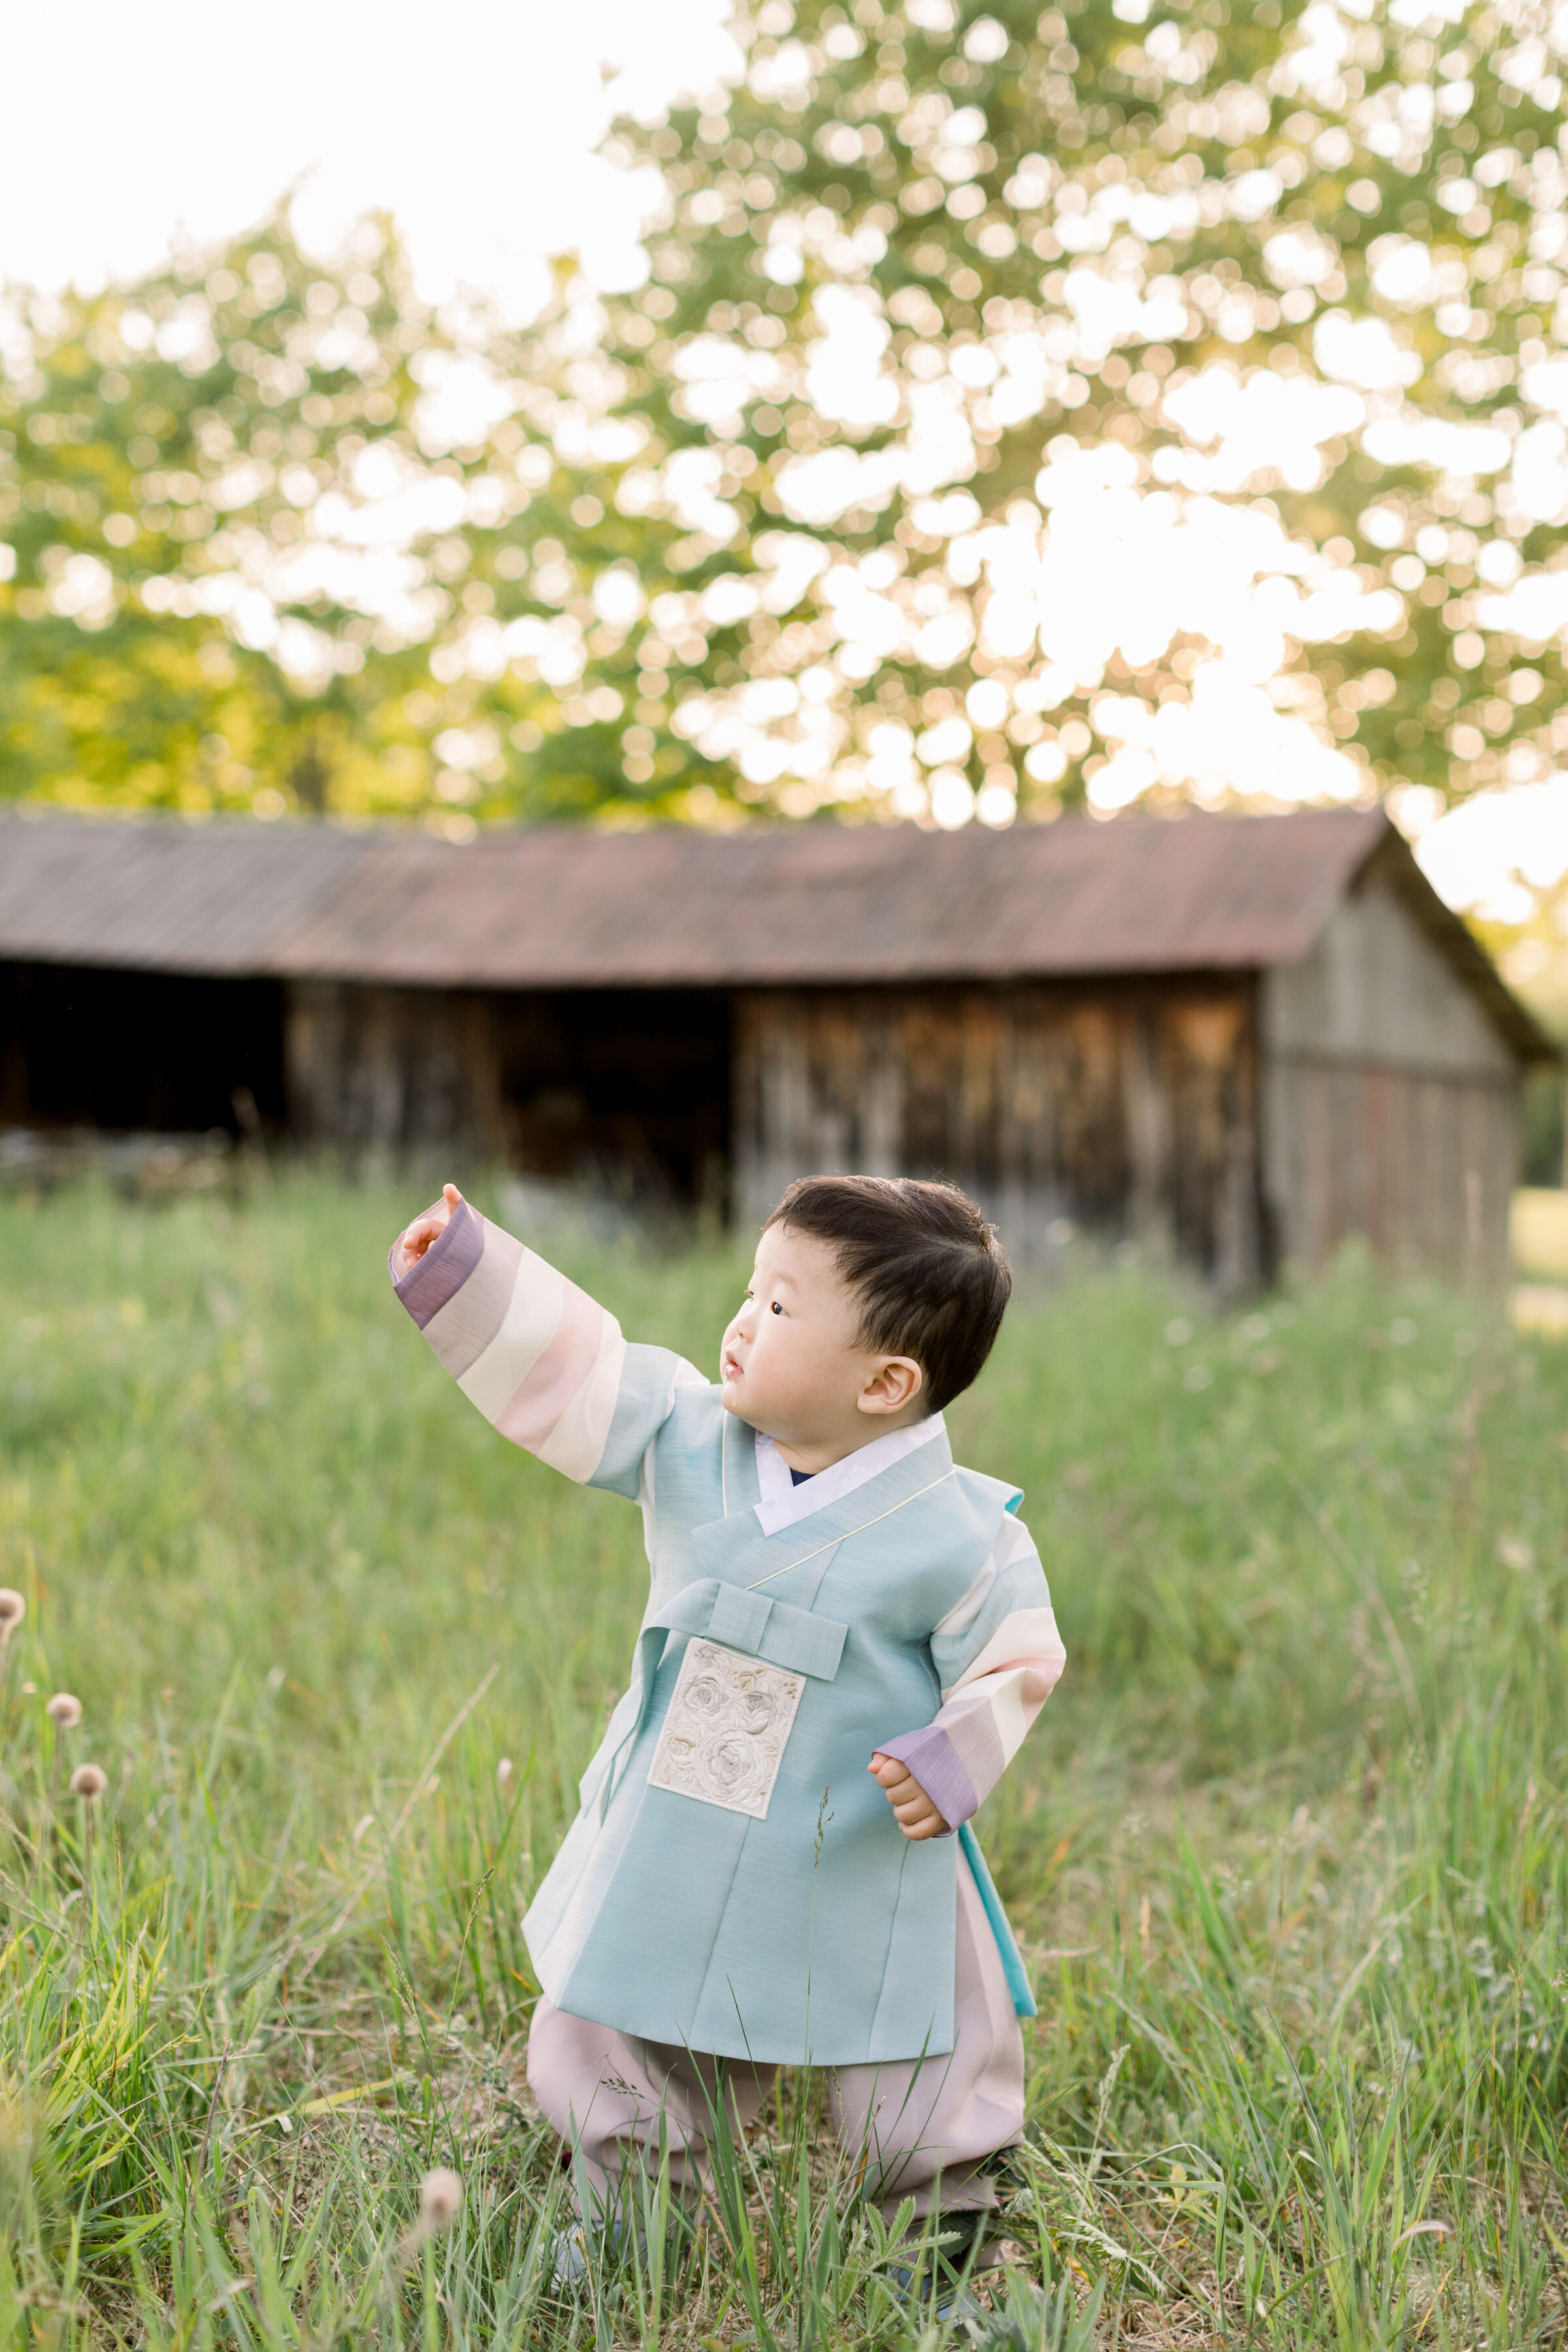  While wearing traditional Japanese attire, Ottawa, Ontario's Chelsea Mason Photography captures this toddler boy striking a martial arts pose. martial arts toddler boy traditional Japanese attire Ottawa Ontario photographer #ChelseaMasonPhotography 